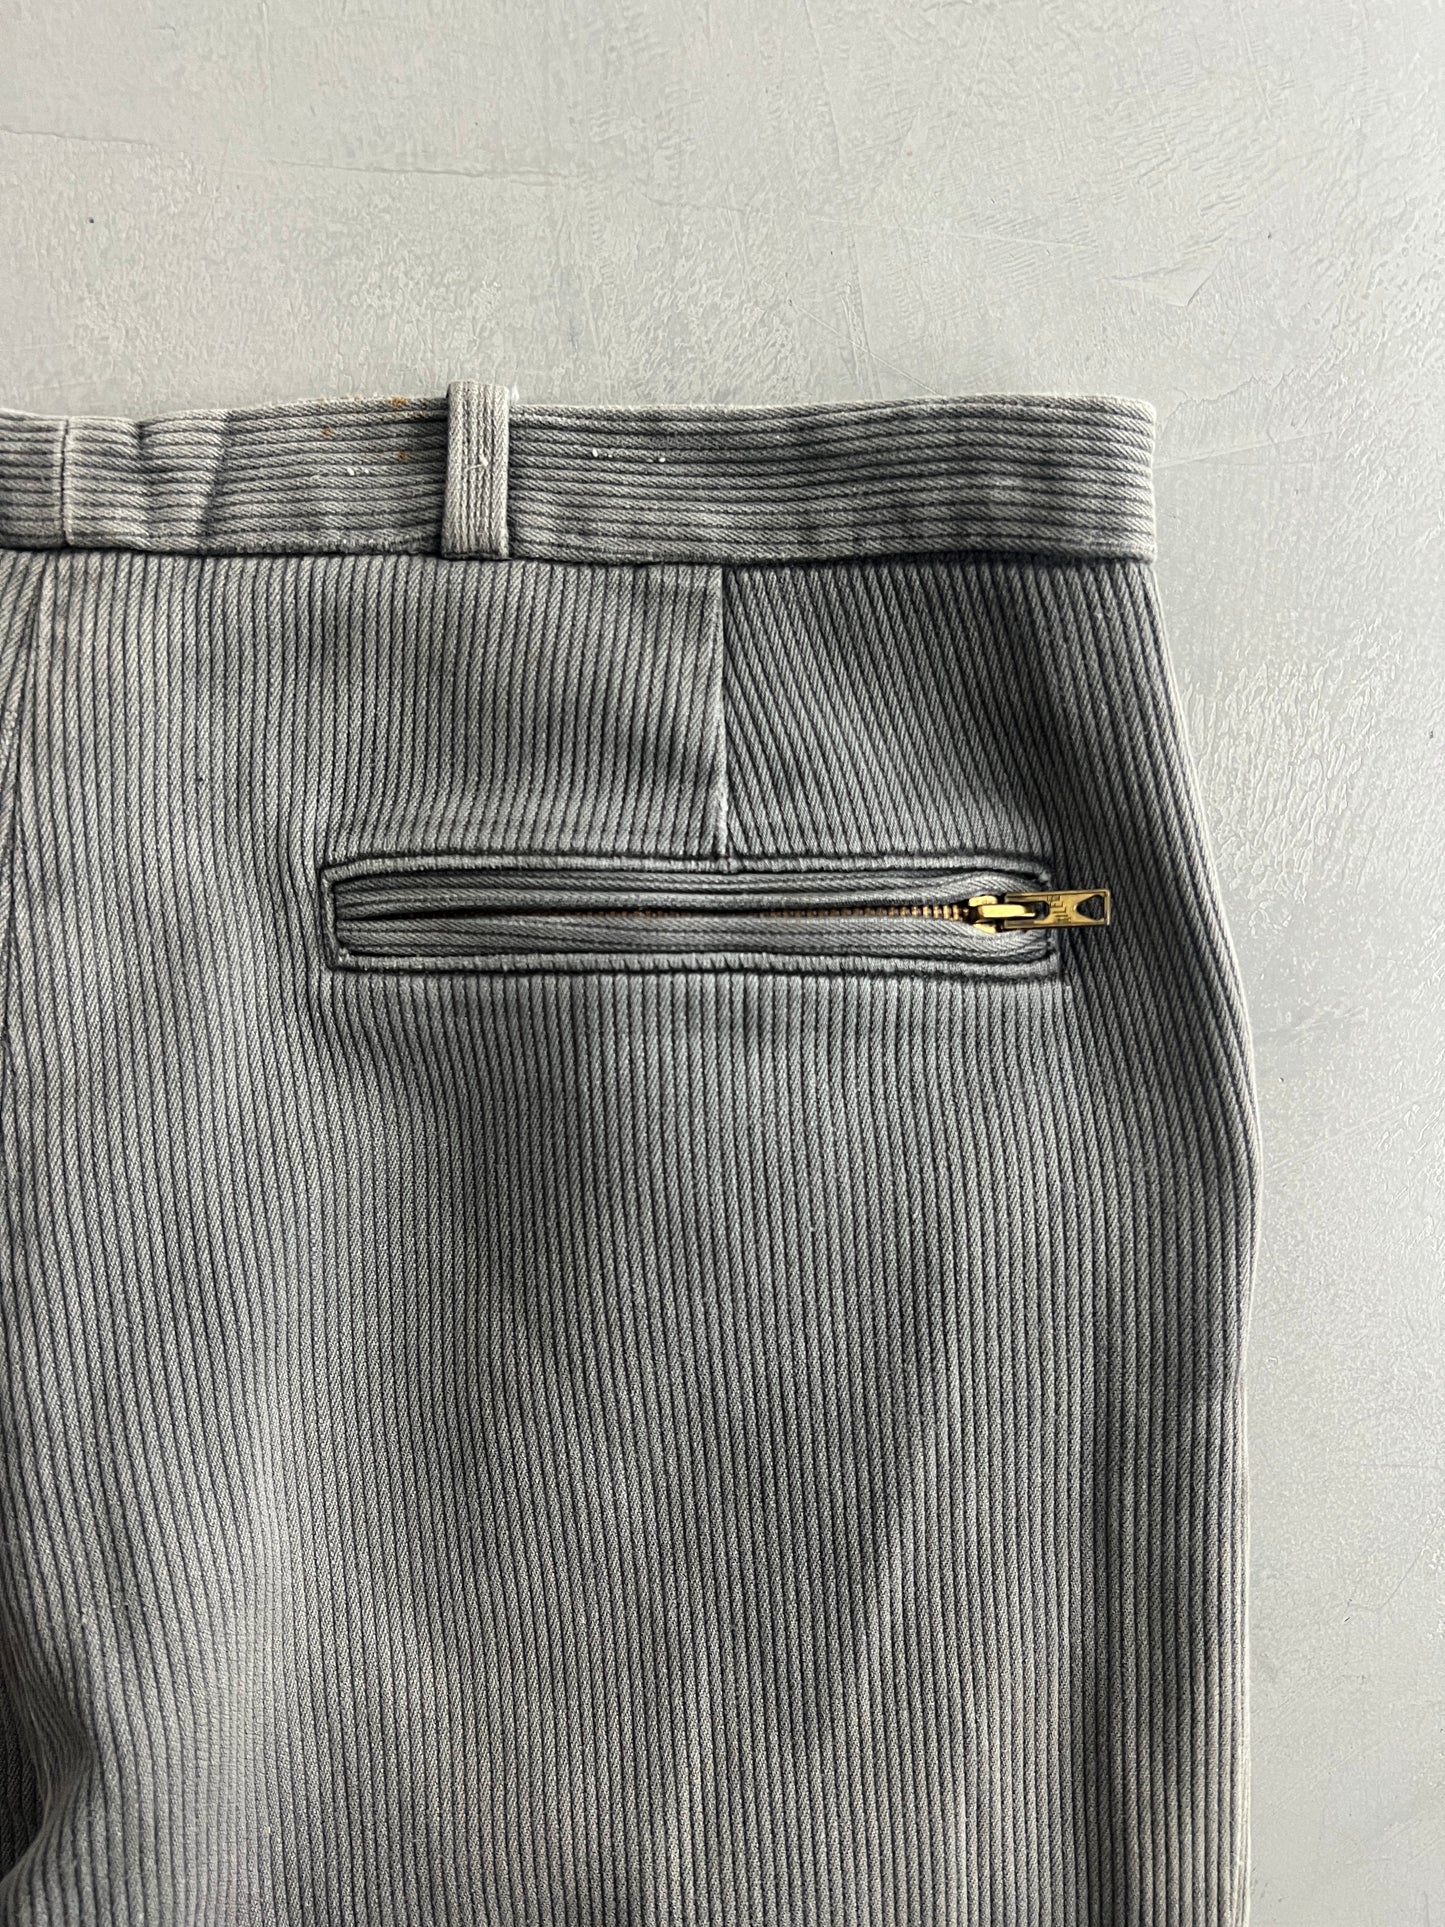 40's French Cord Work Pants [34"] DROP